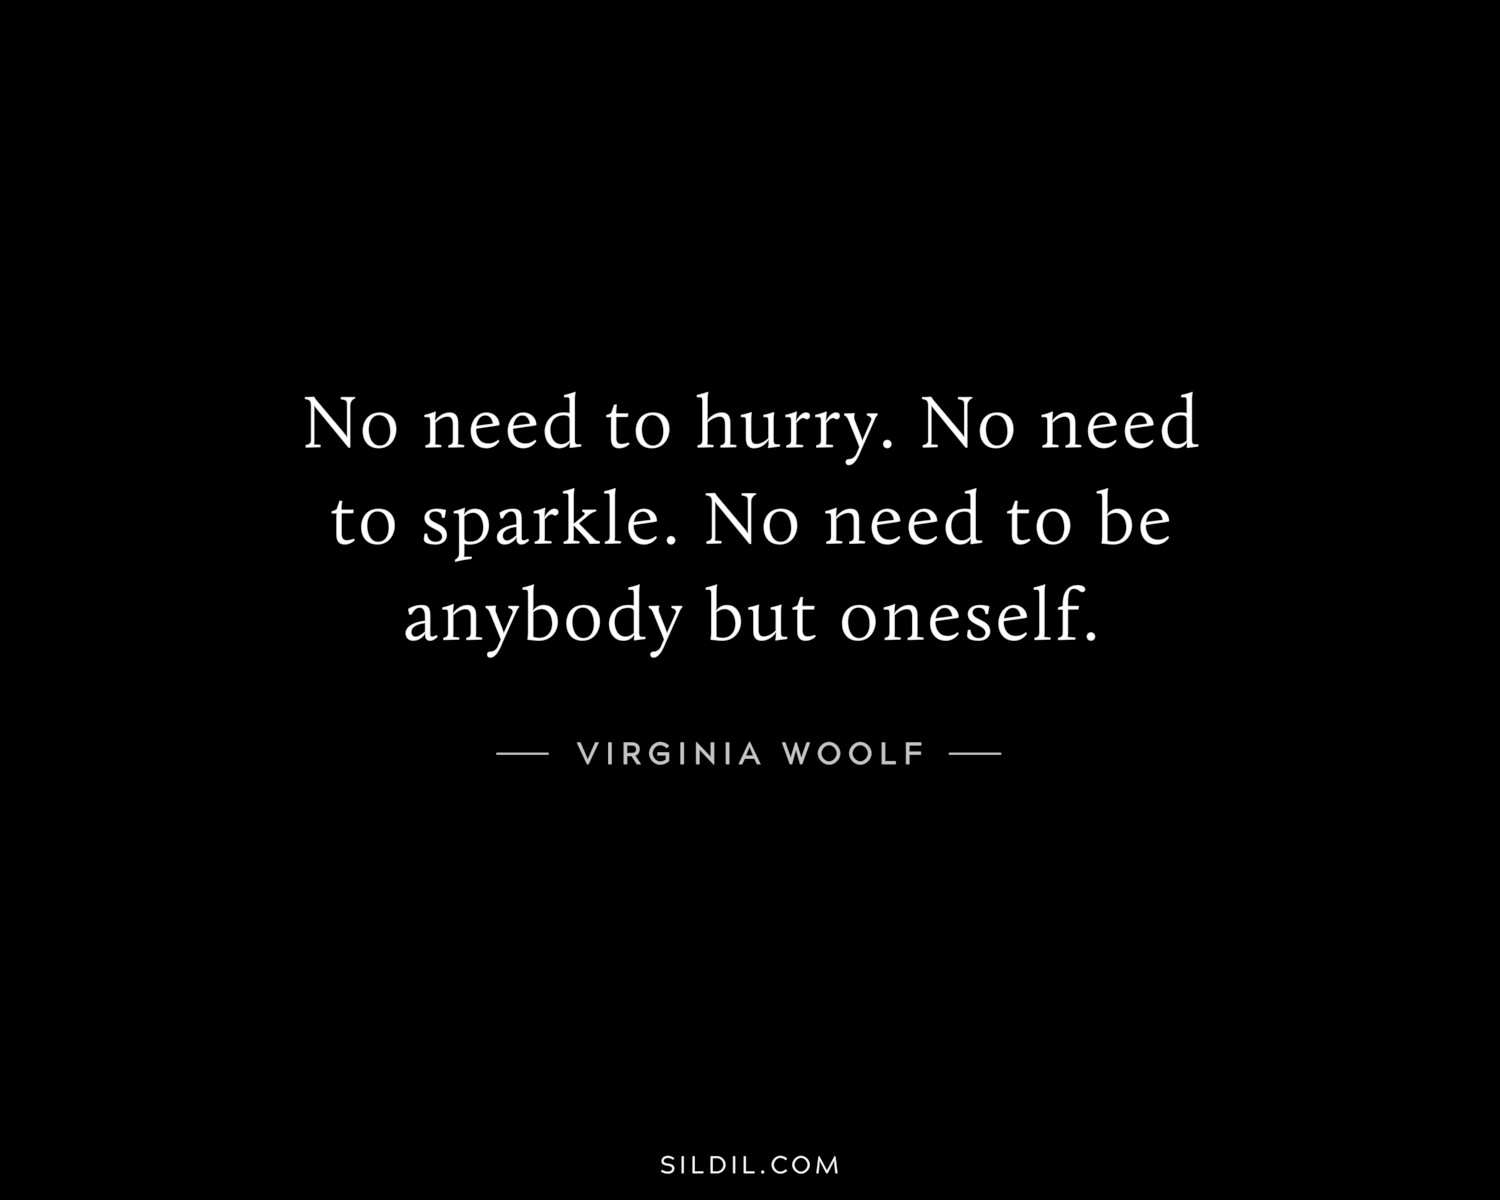 No need to hurry. No need to sparkle. No need to be anybody but oneself.